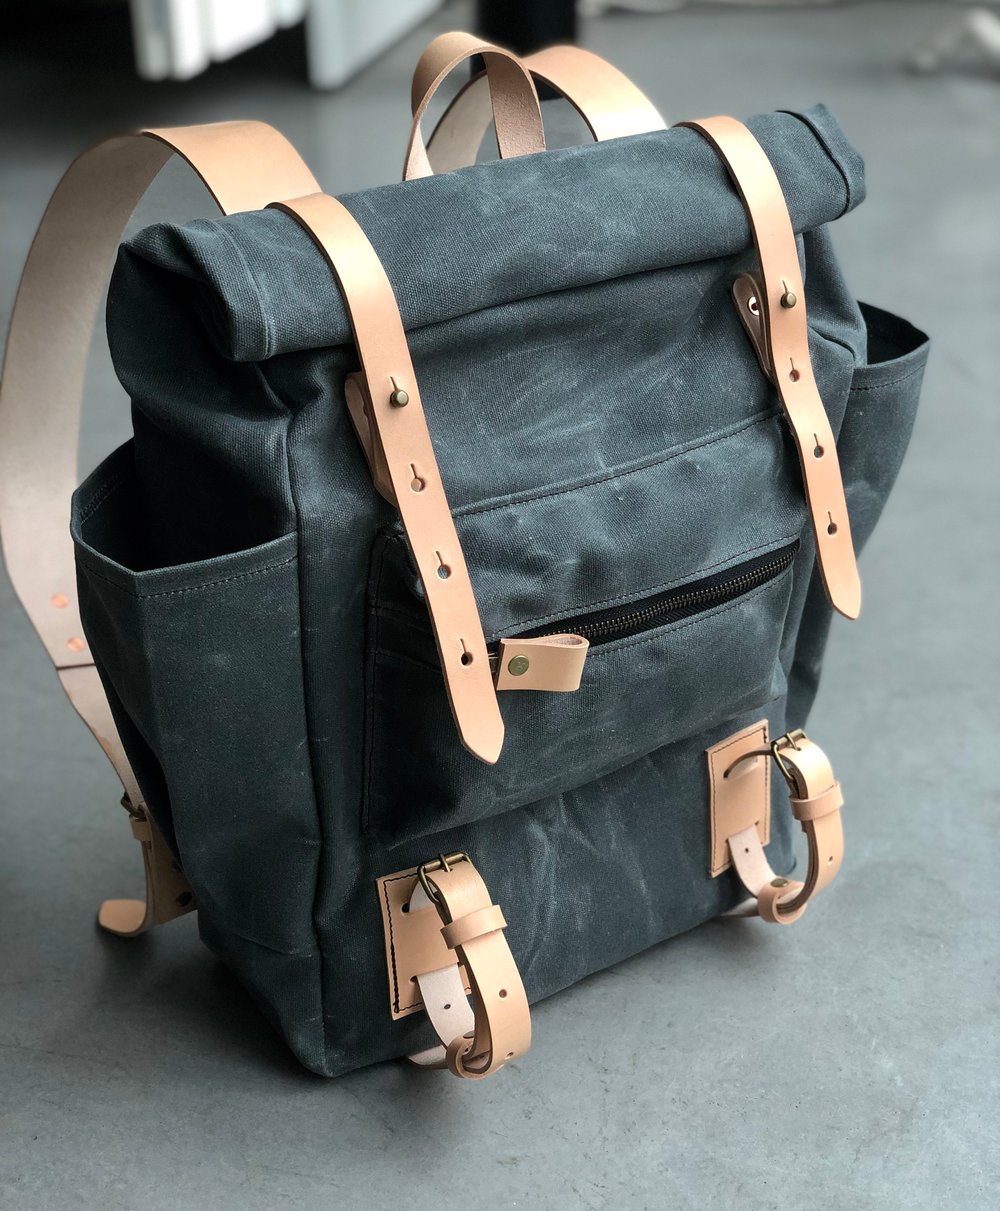 Yoga backpack in waxed canvas with zipper pocket and double yoga straps